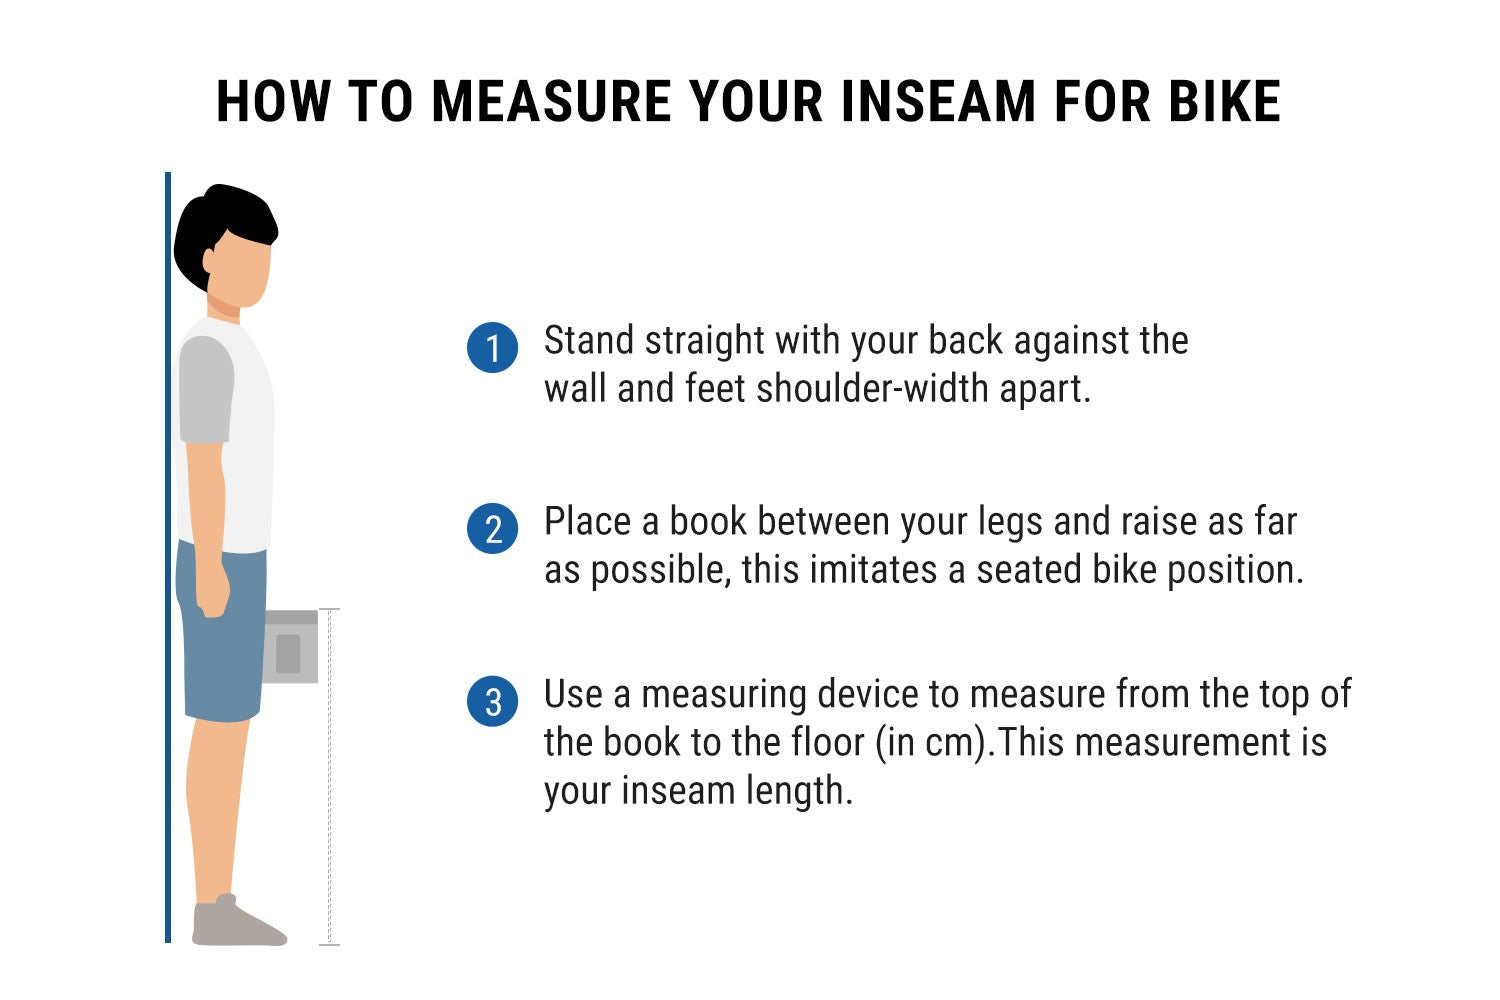 How to Measure Your Inseam for Bike